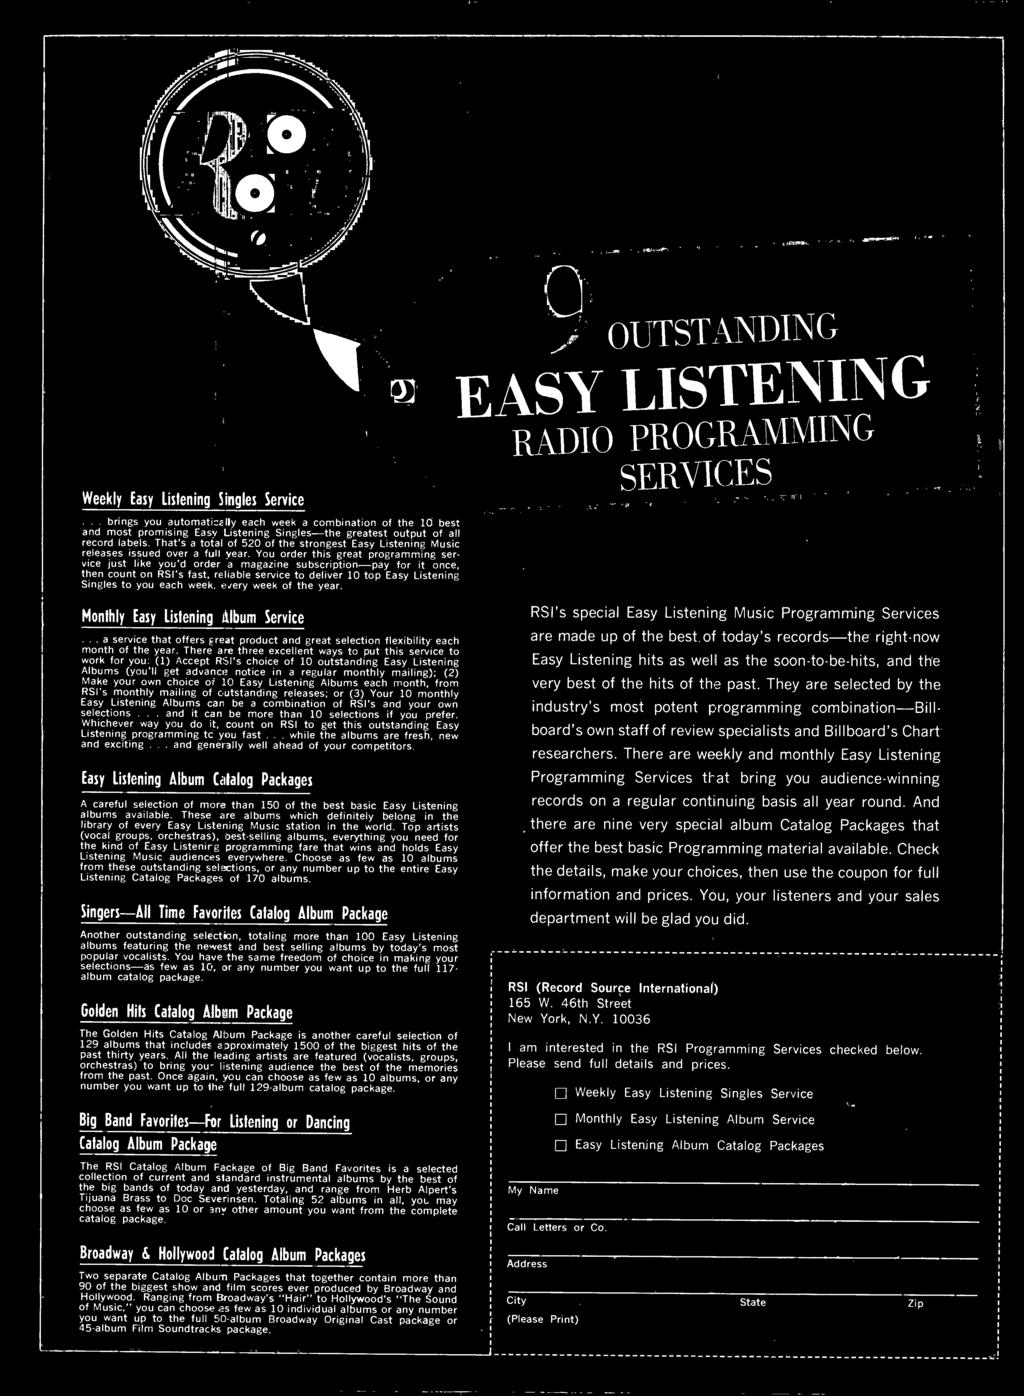 week, every week of the year. Monthly Easy Listening Album Service... a service that offers great product and great selection flexibility each month of the year.